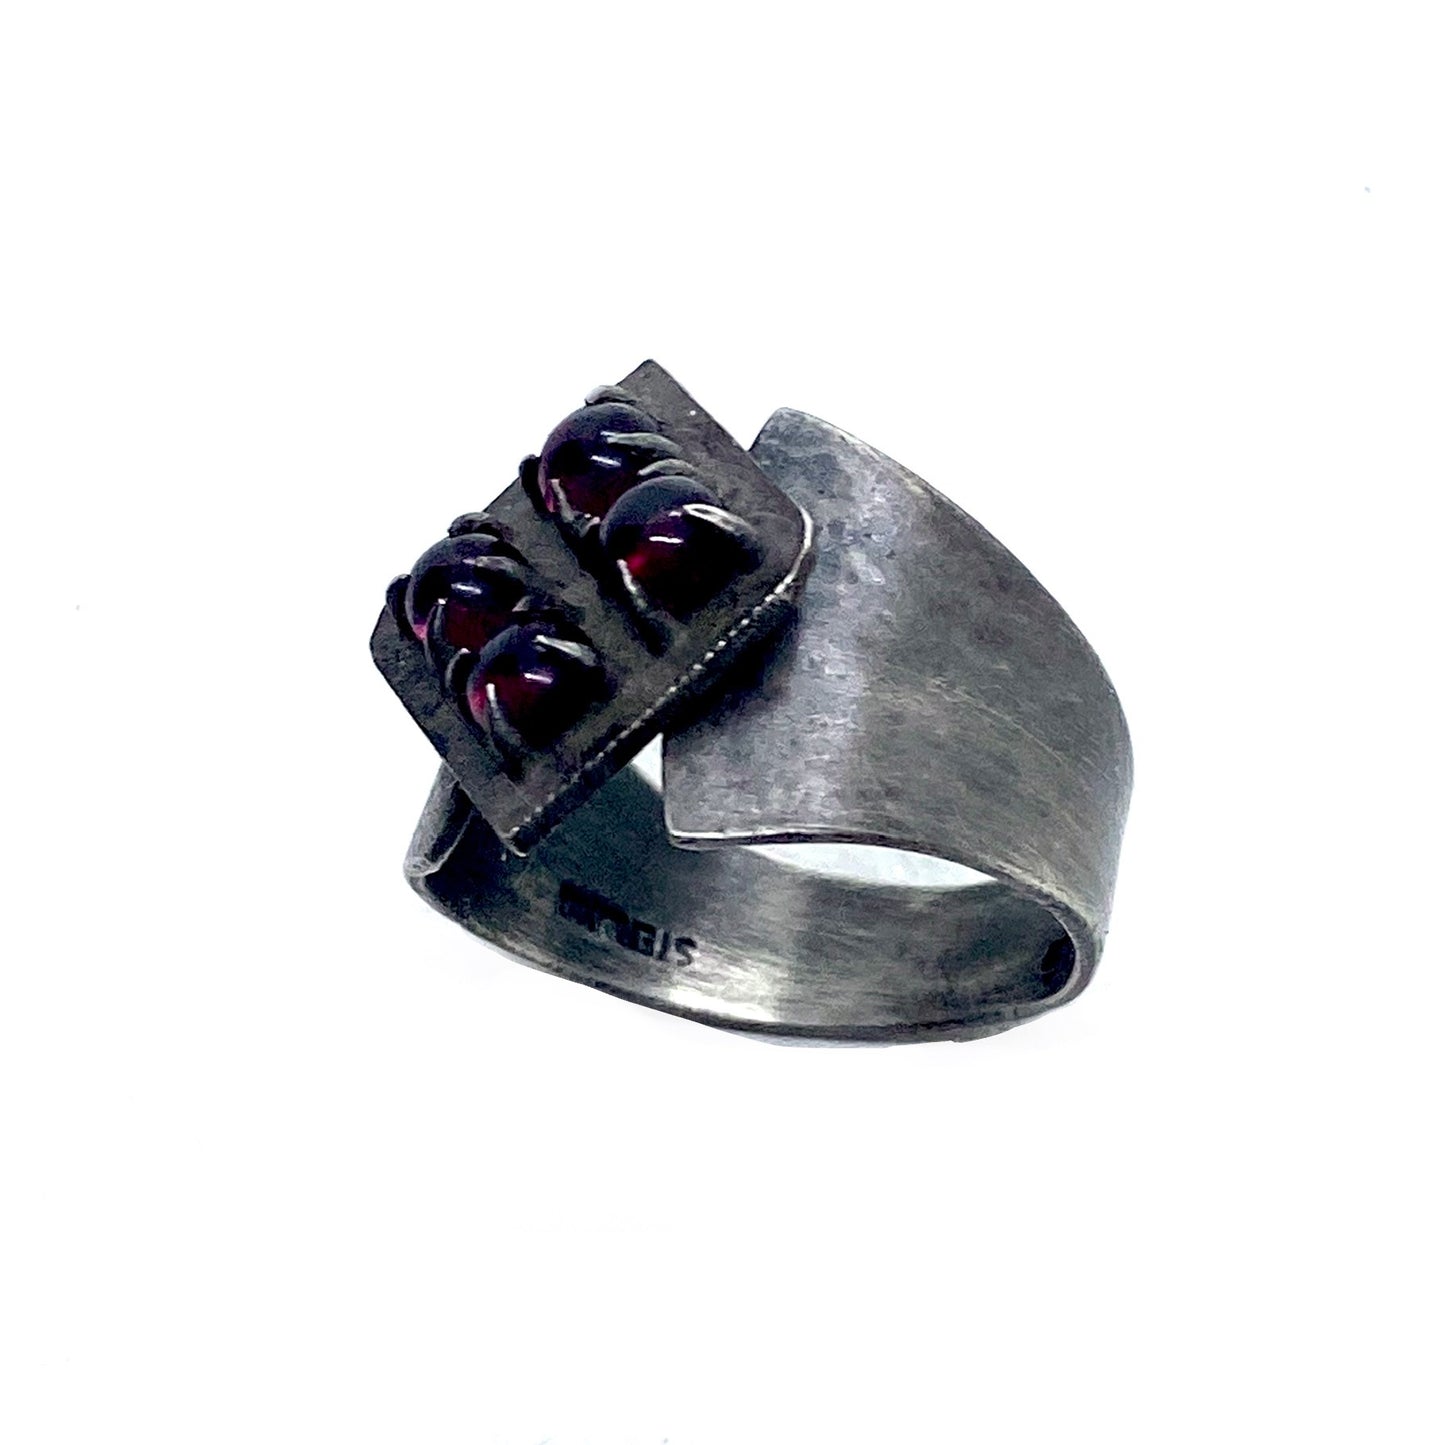 Brutalist Ring with Garnet in Sterling Silver